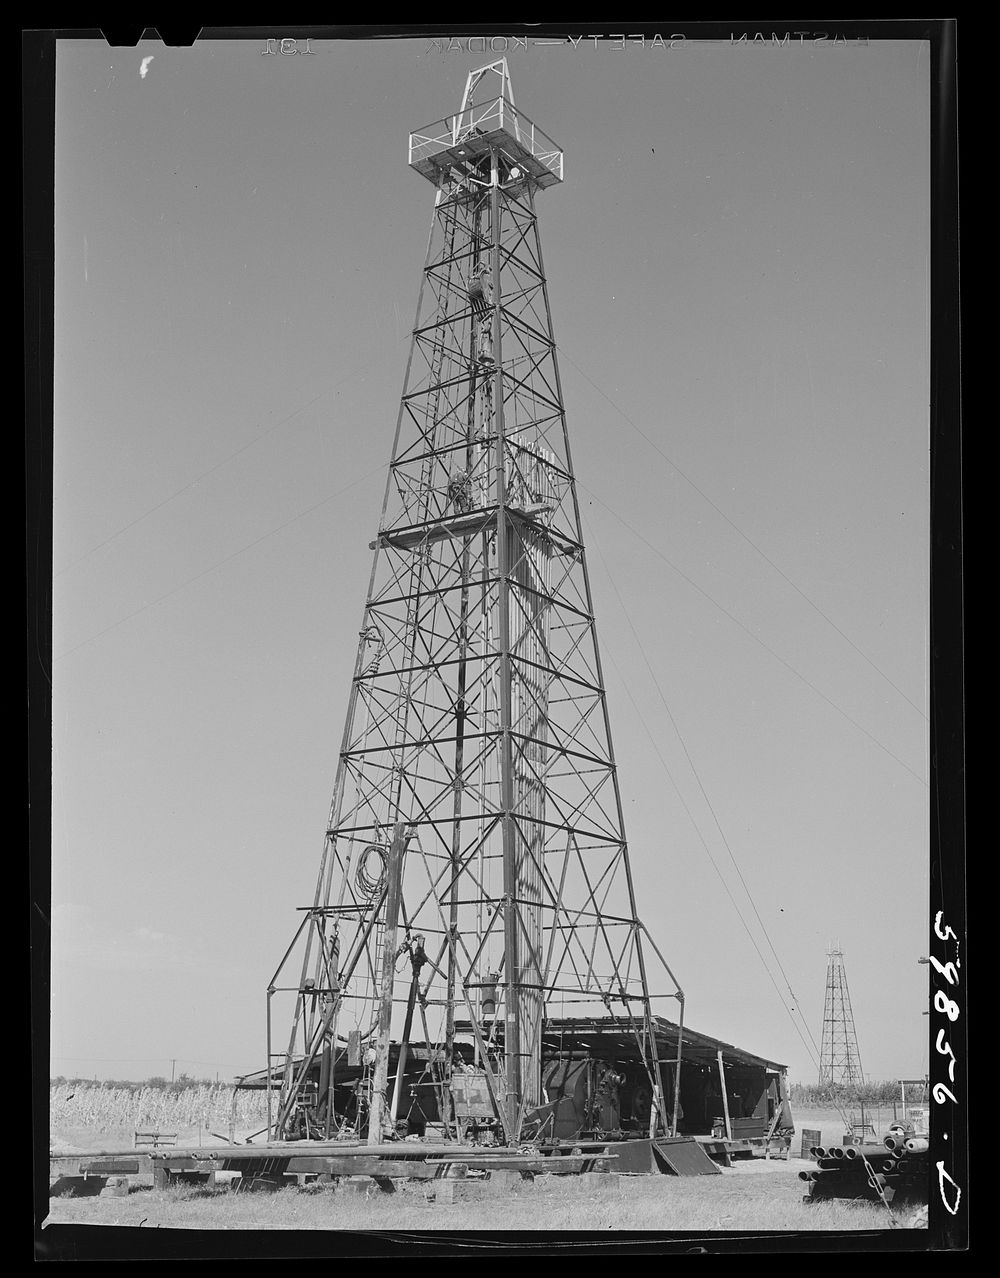 [Untitled photo, possibly related to: Oil well derricks and pumps in Moundridge area near McPherson, Kansas]. Sourced from…